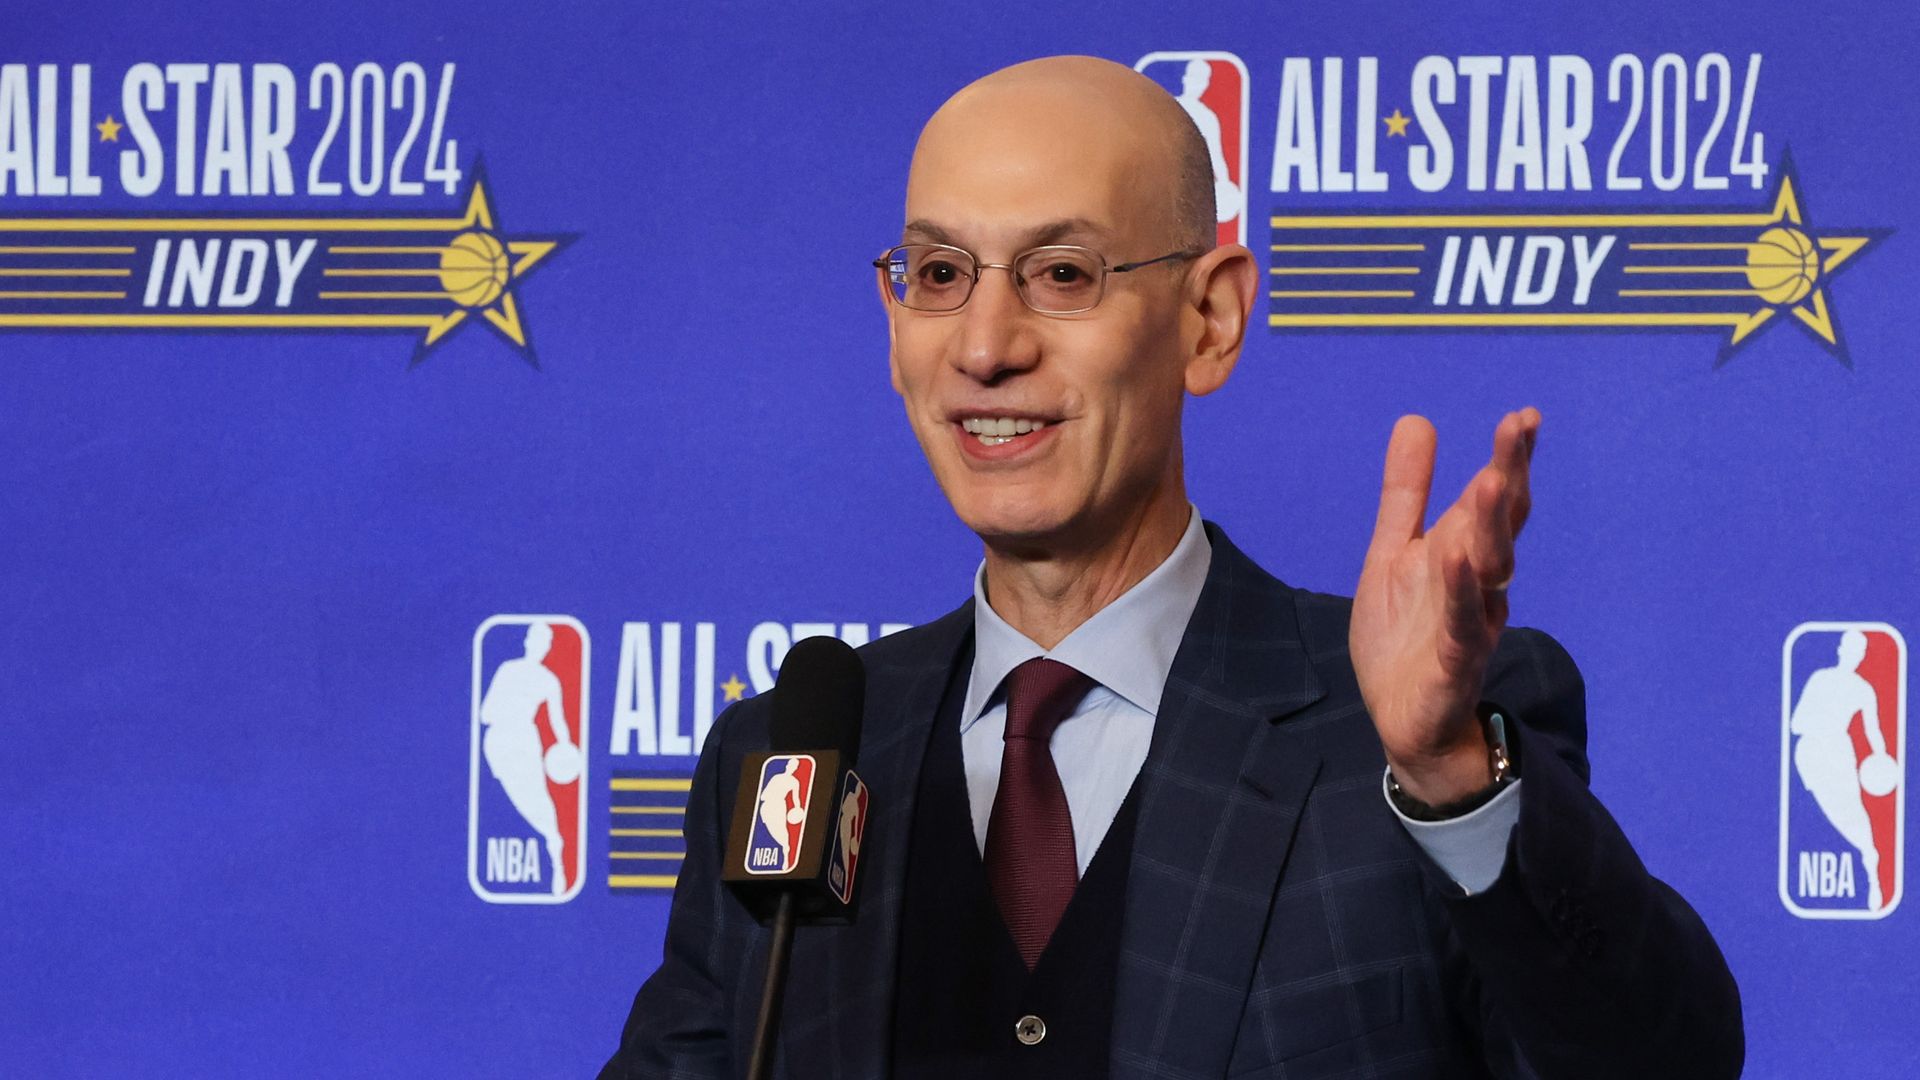 NBA commissioner Adam Silver gesturing with his left hand